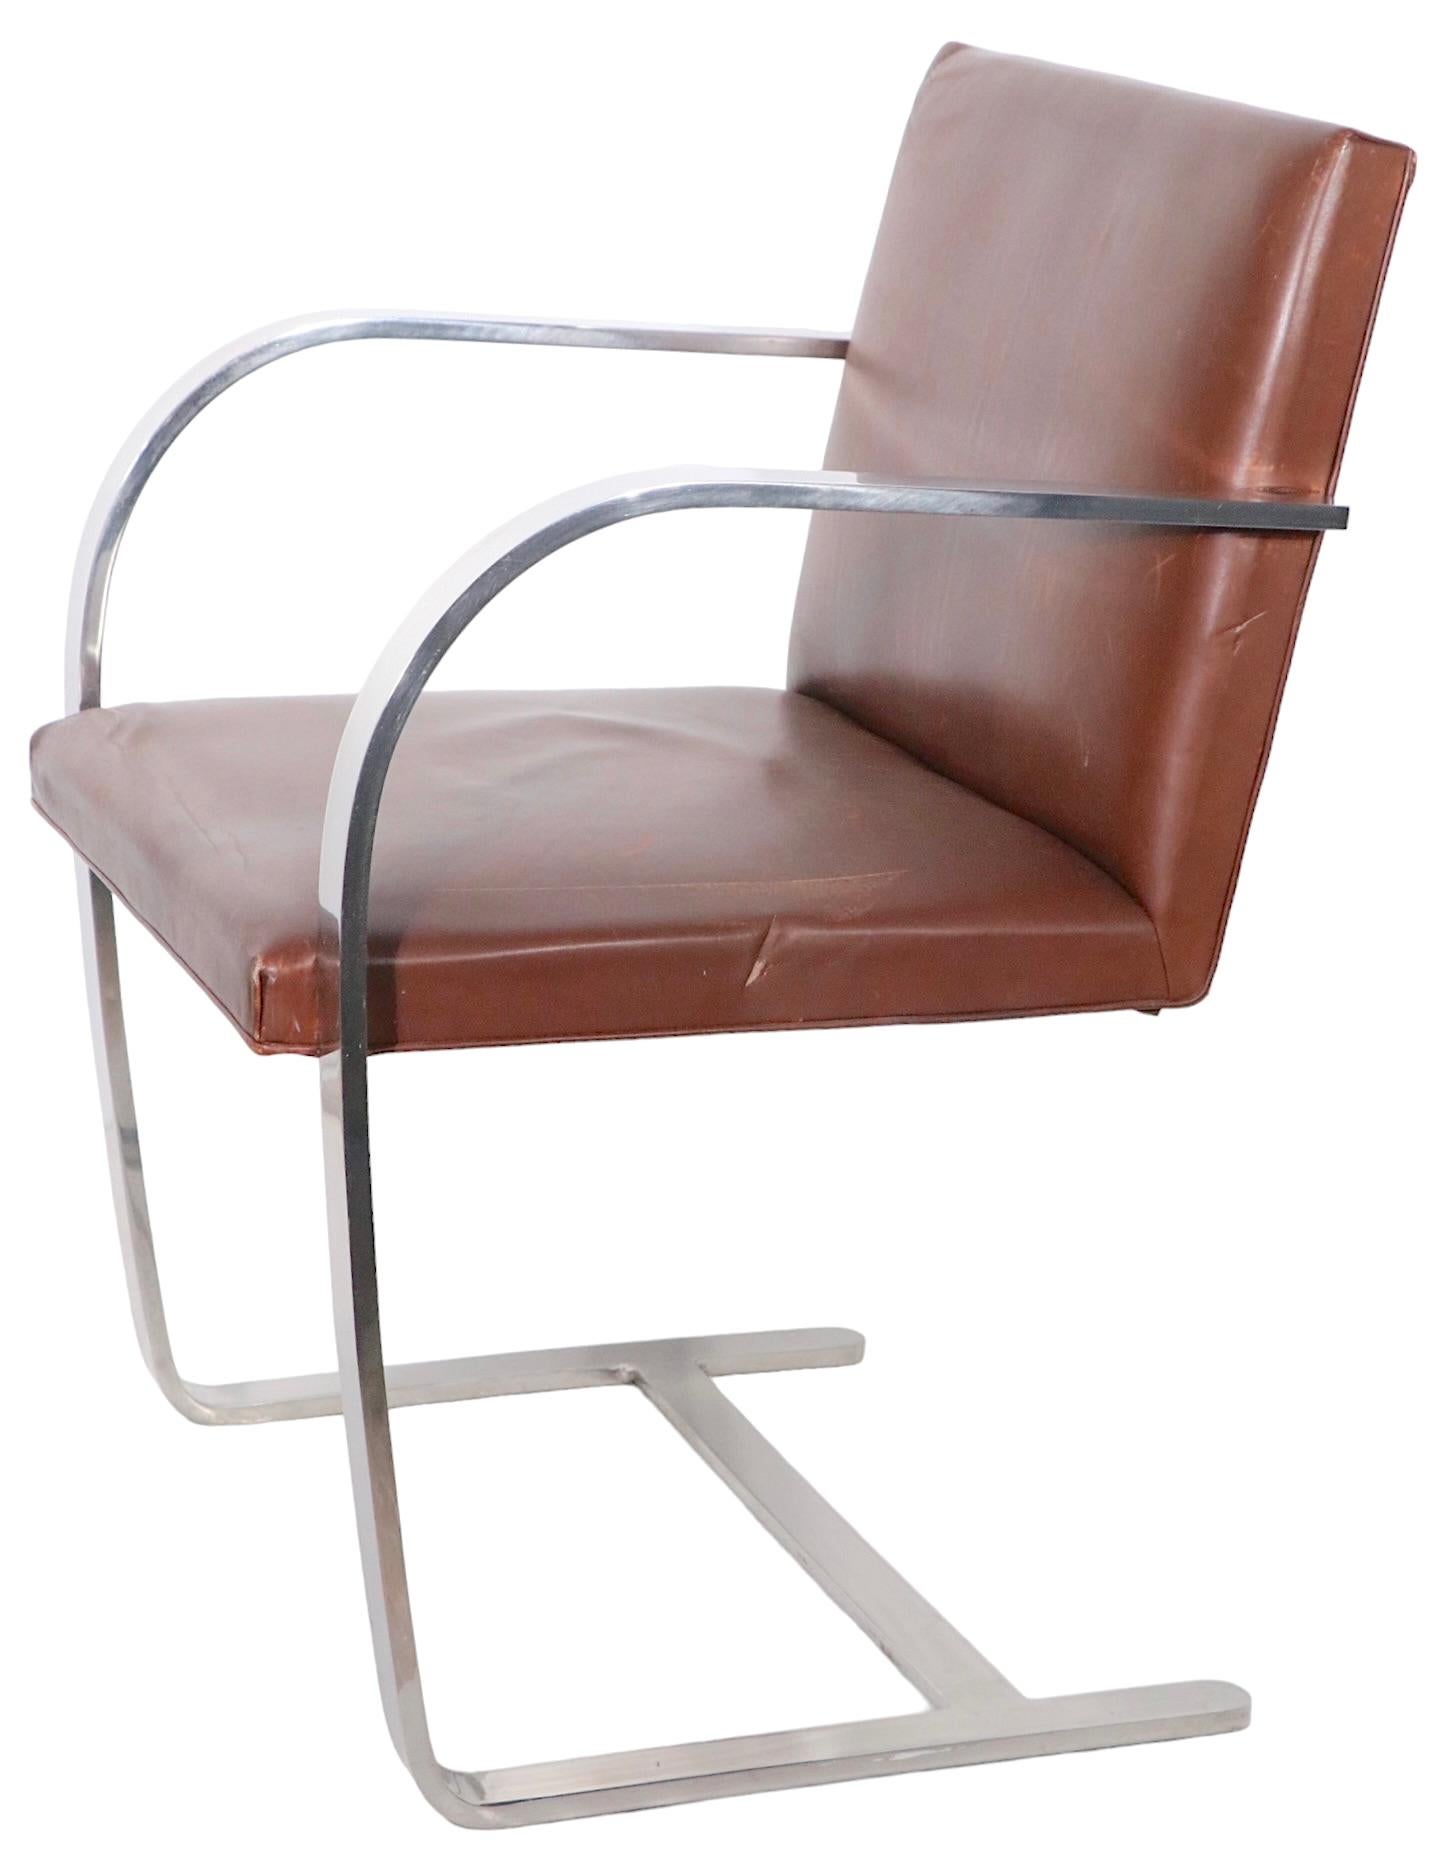 Pr. Meis Van Der Rohe Designed Brno Chairs by Knoll in Brown Leather 10